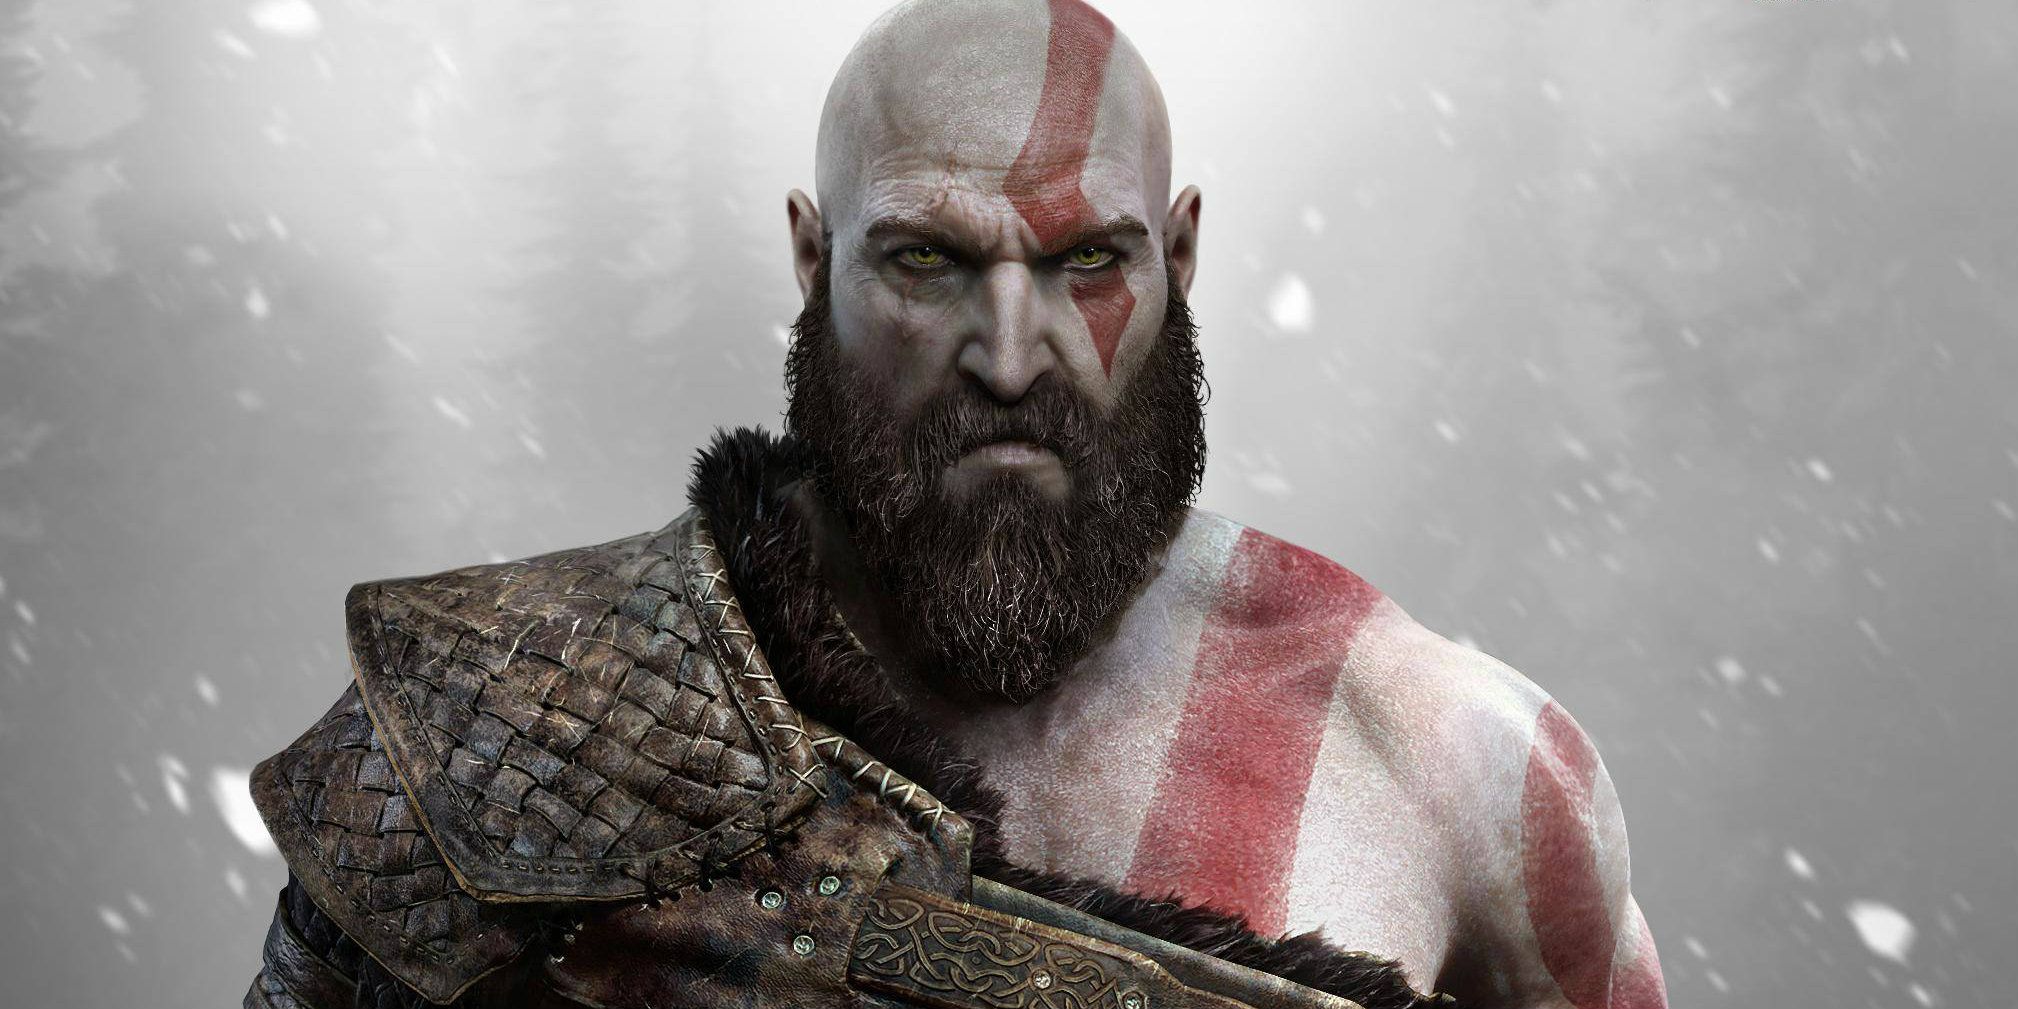 Kratos as he appears in the two most recent God of War games, still bald, but with a long beard and aged face.